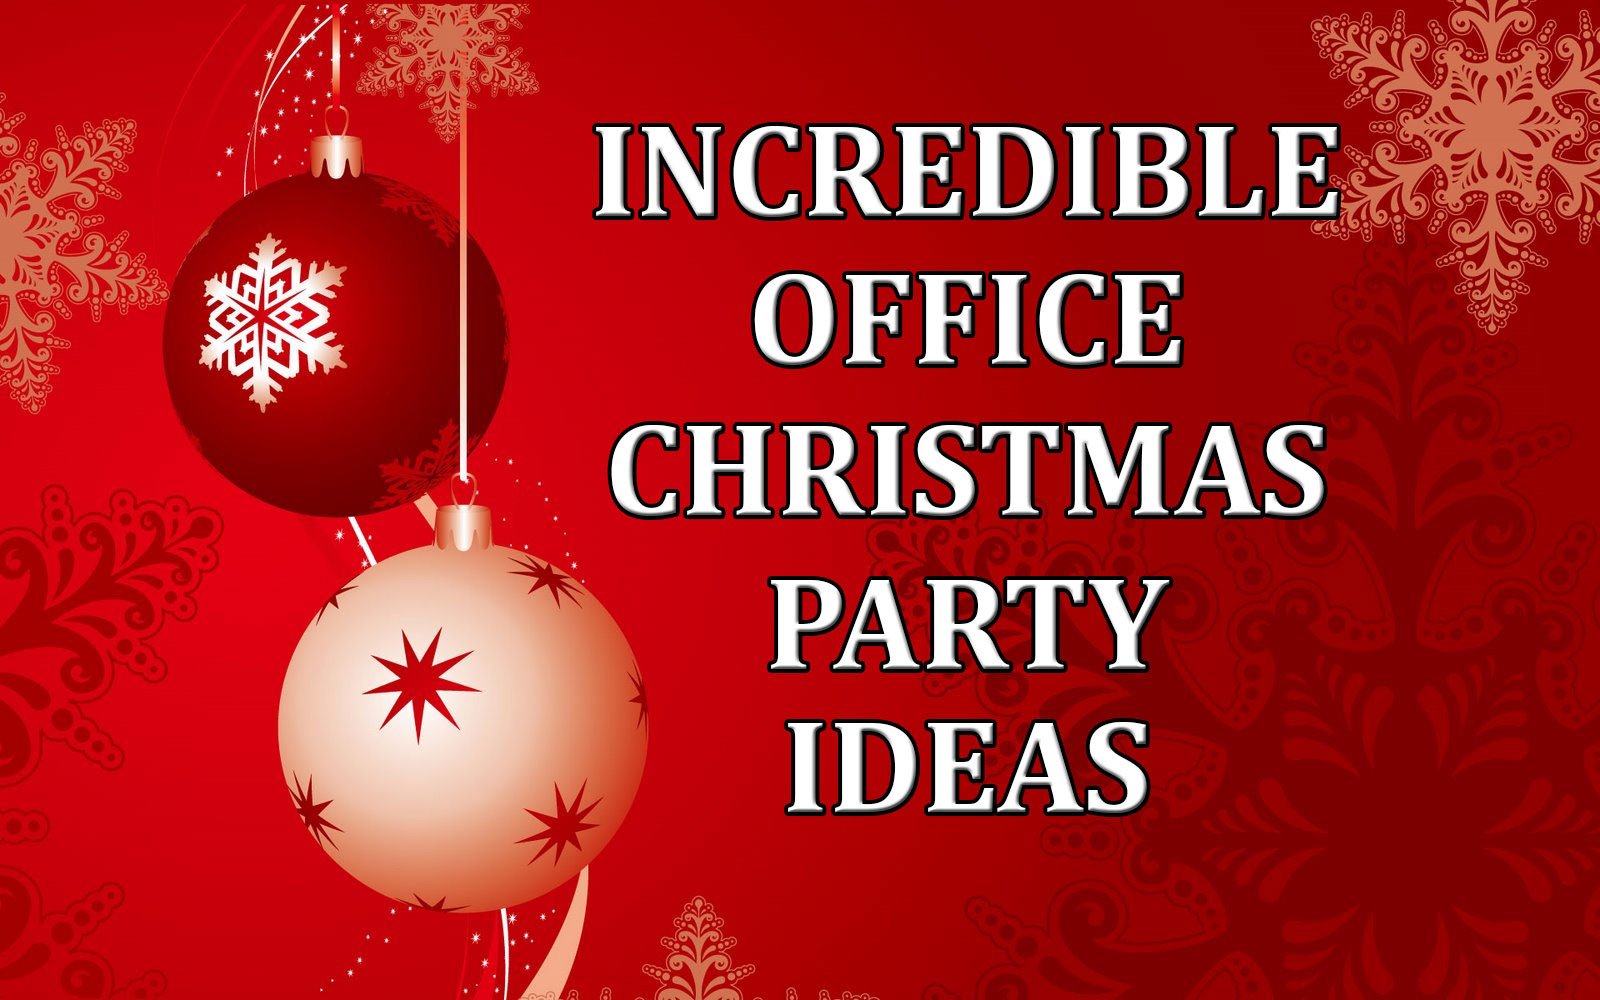 Holiday Party Ideas For Small Office
 Incredible fice Christmas Party Ideas edy Ventriloquist